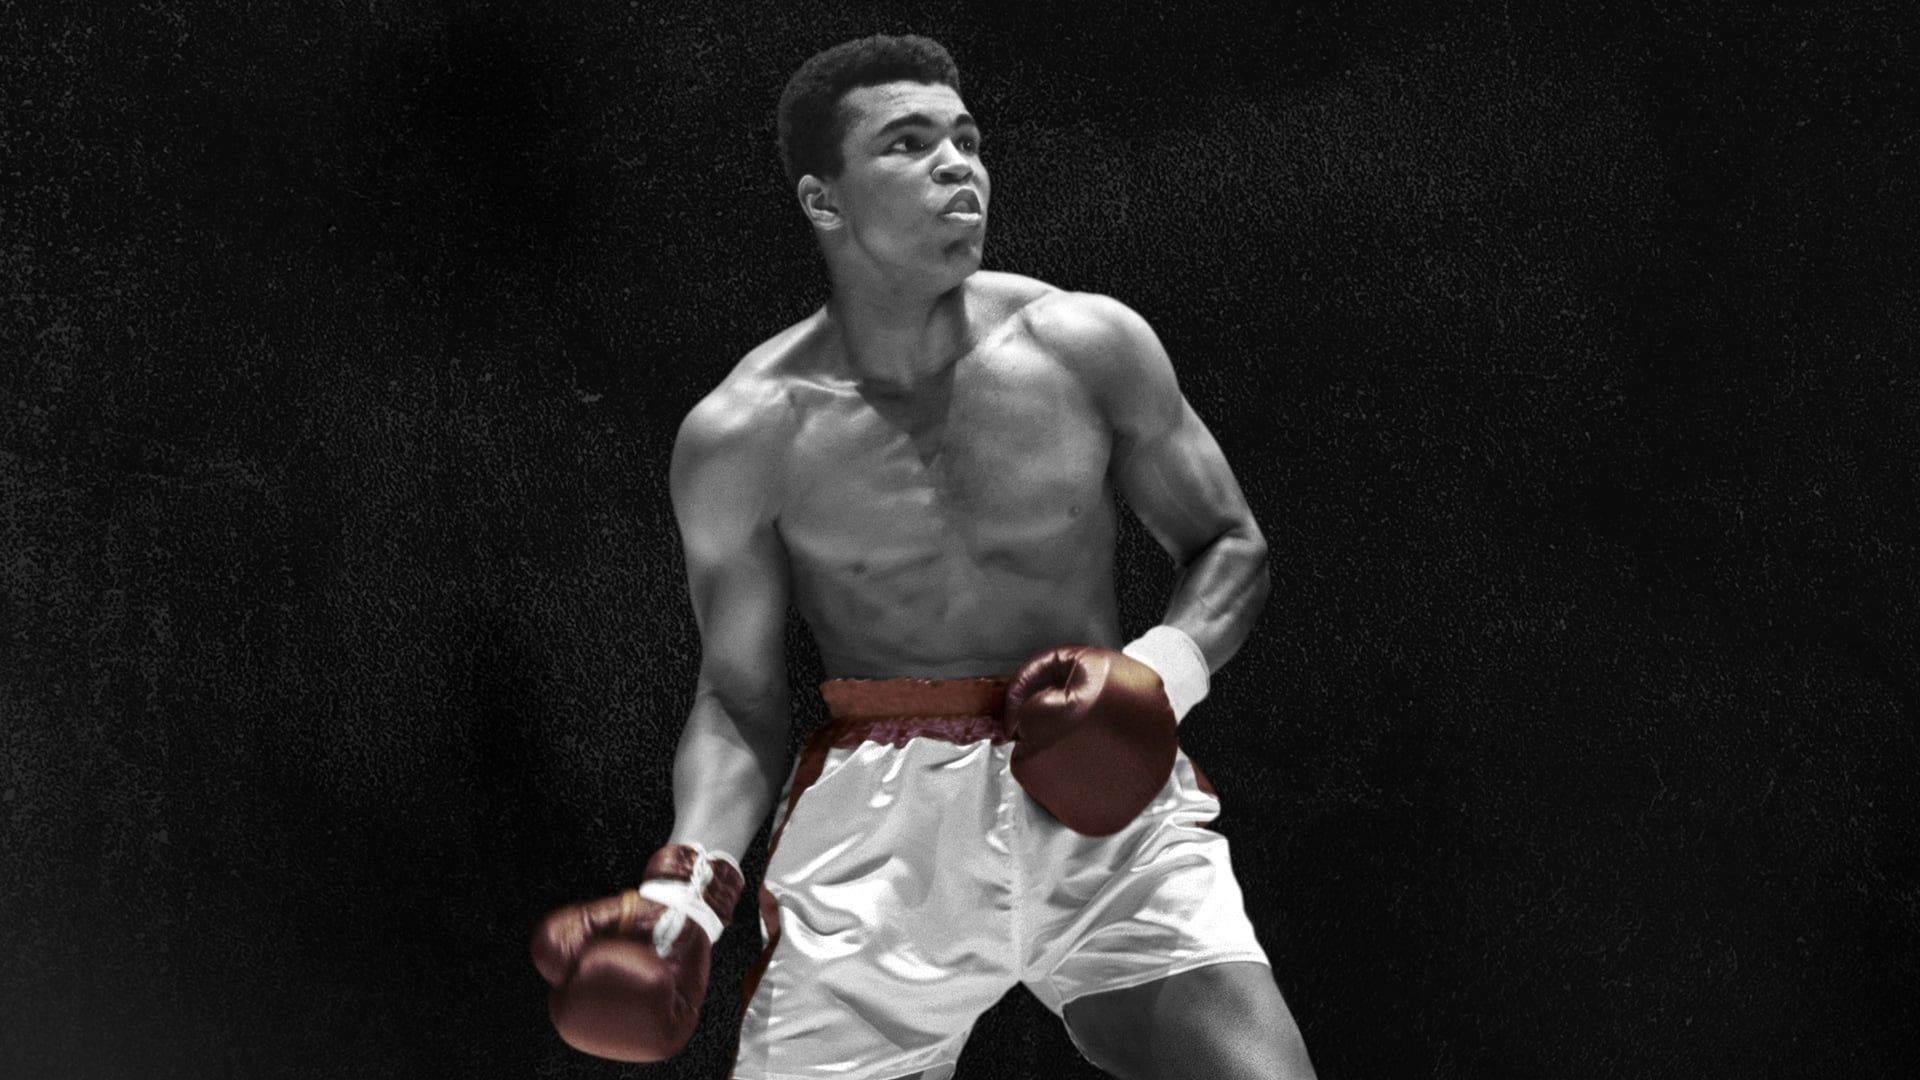 What's My Name: Muhammad Ali background